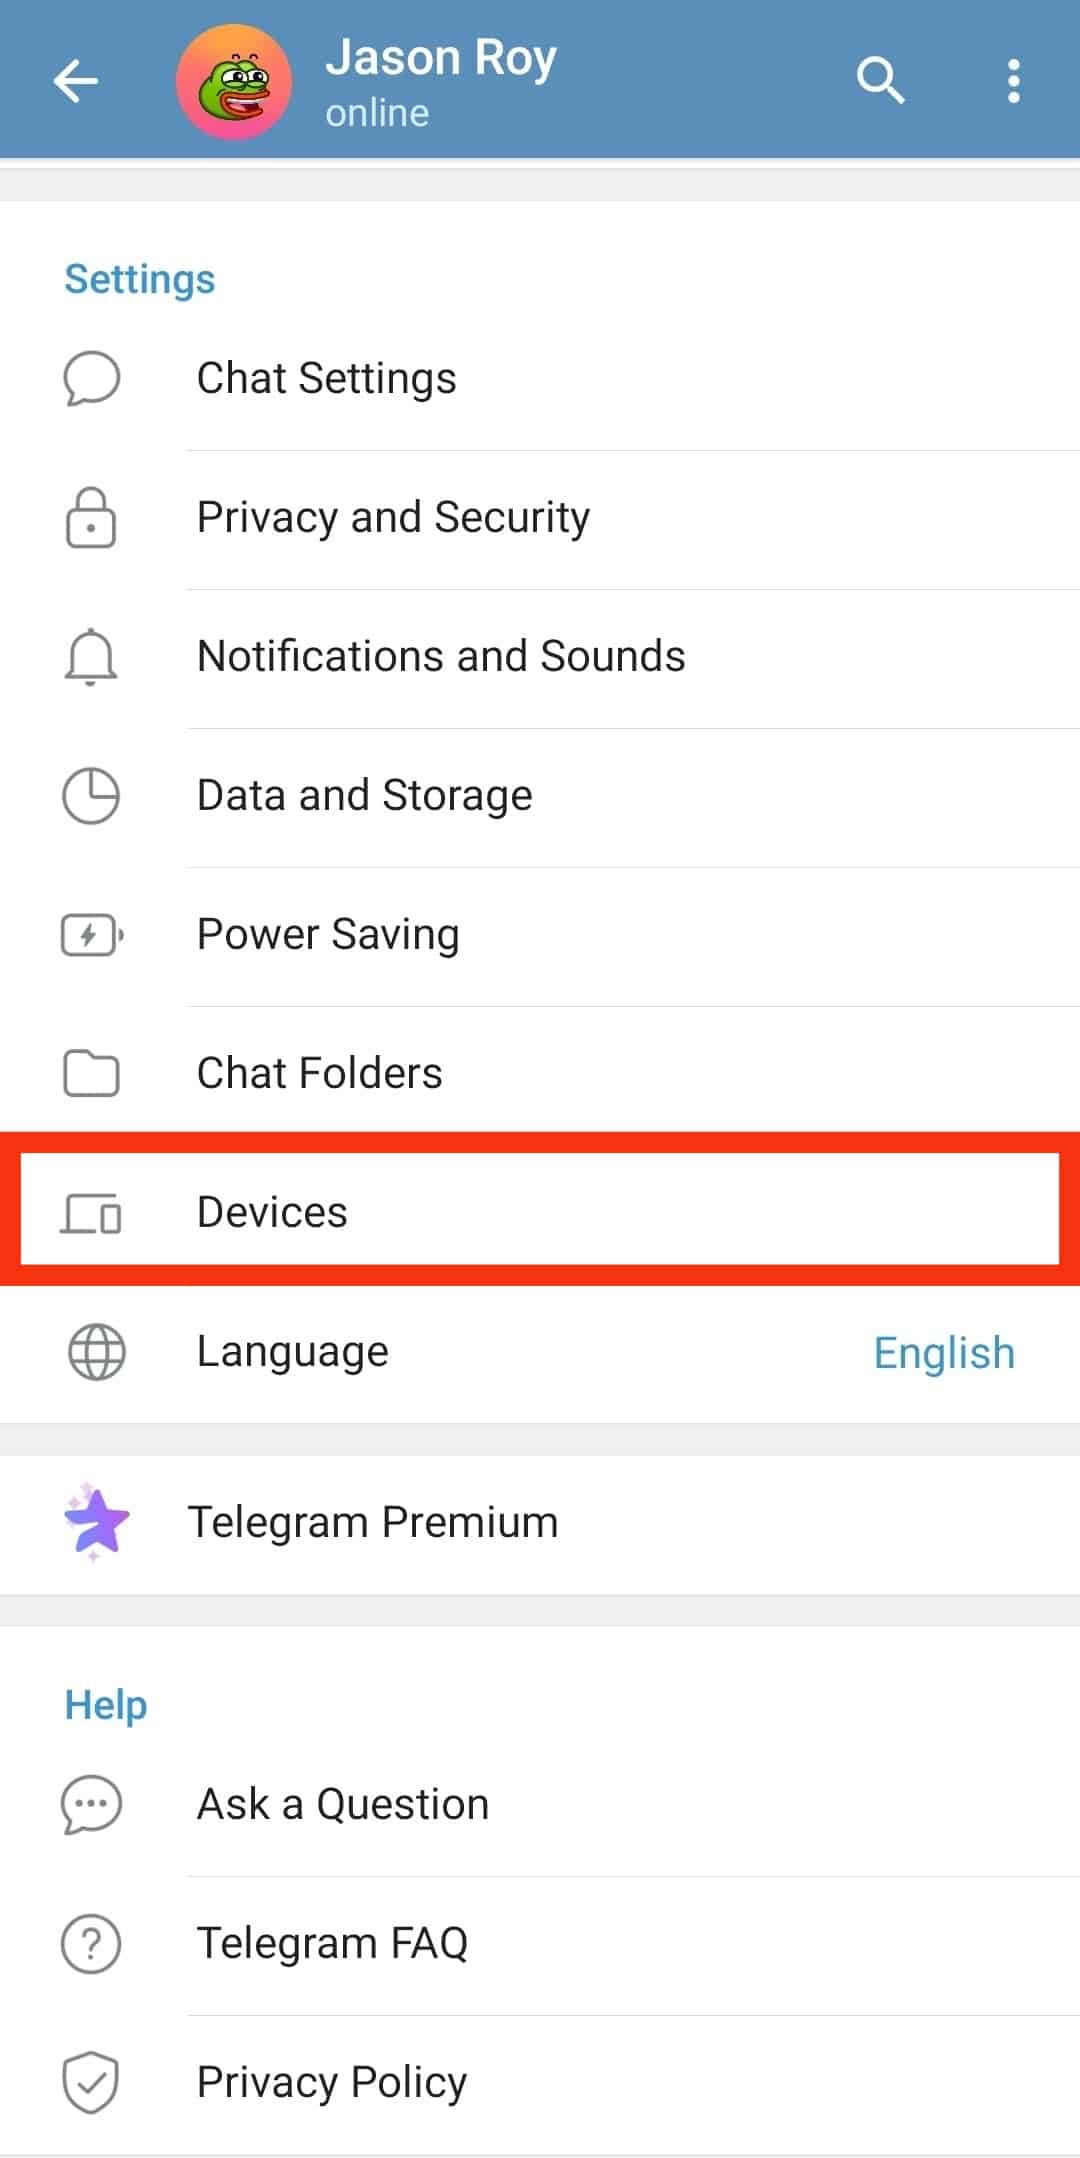 Click On The Devices Option